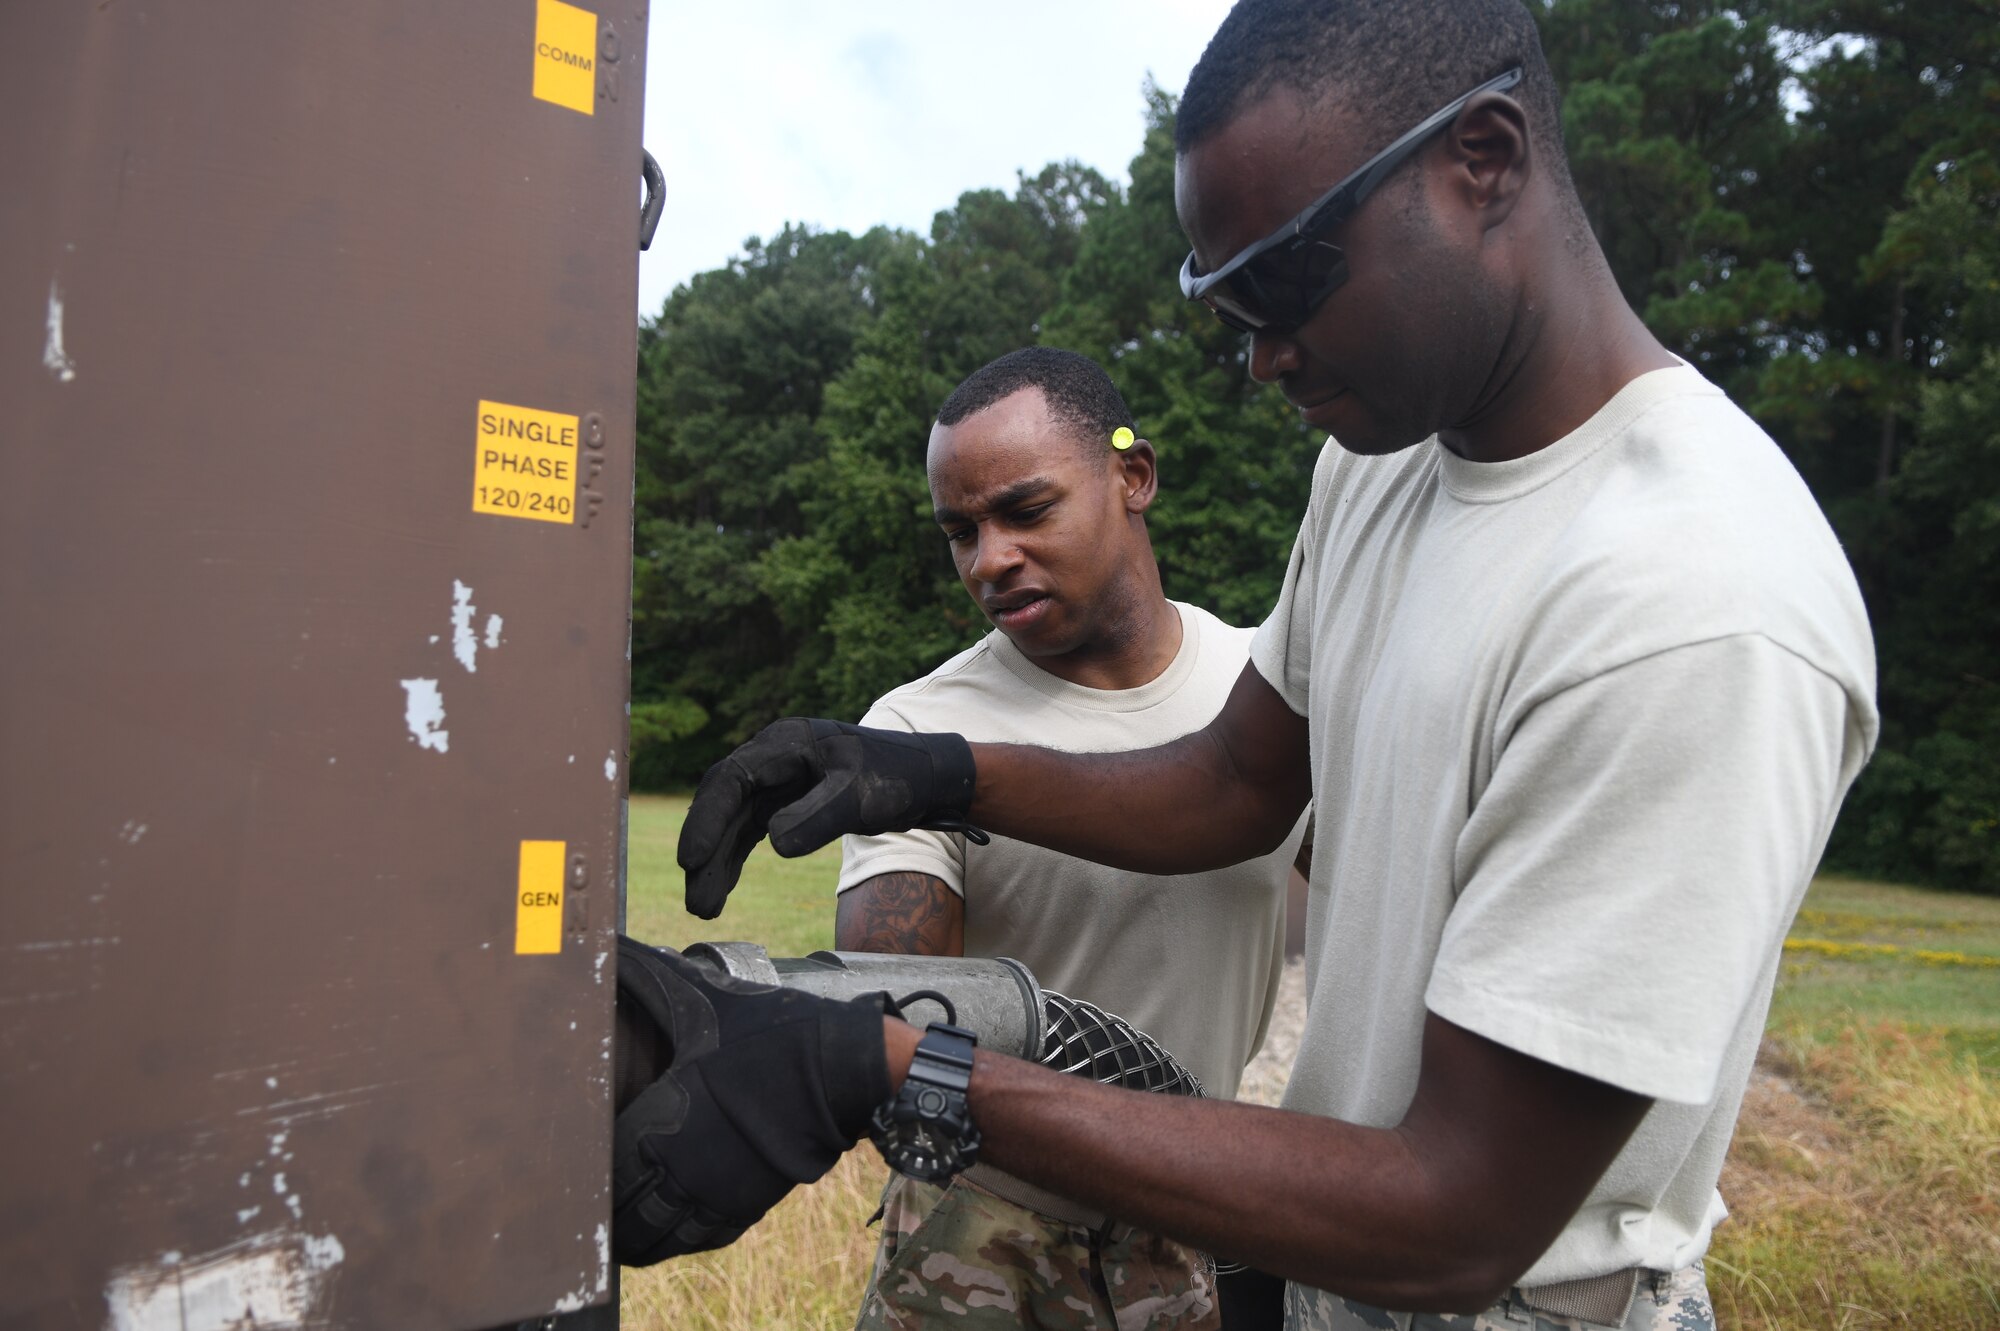 Seymour Johnson Air Force Base, N.C. — Staff. Sgt. Moctar Sana and Senior Airman Courtney Wilking, 4th Civil Engineer Squadron pavement and production specialists, connect a generator to the flightline’s barrier control system Sept. 4, 2019, at Seymour Johnson Air Force Base, North Carolina. The 4th CES, to include equipment operators, electricians, plumbers, structural craftsman, heating, ventilation and air conditioning, and production technicians, are providing 24-hour response and recovery operations during and following Hurricane Dorian. (U.S. Air Force photo by Staff Sgt. Michael Charles)